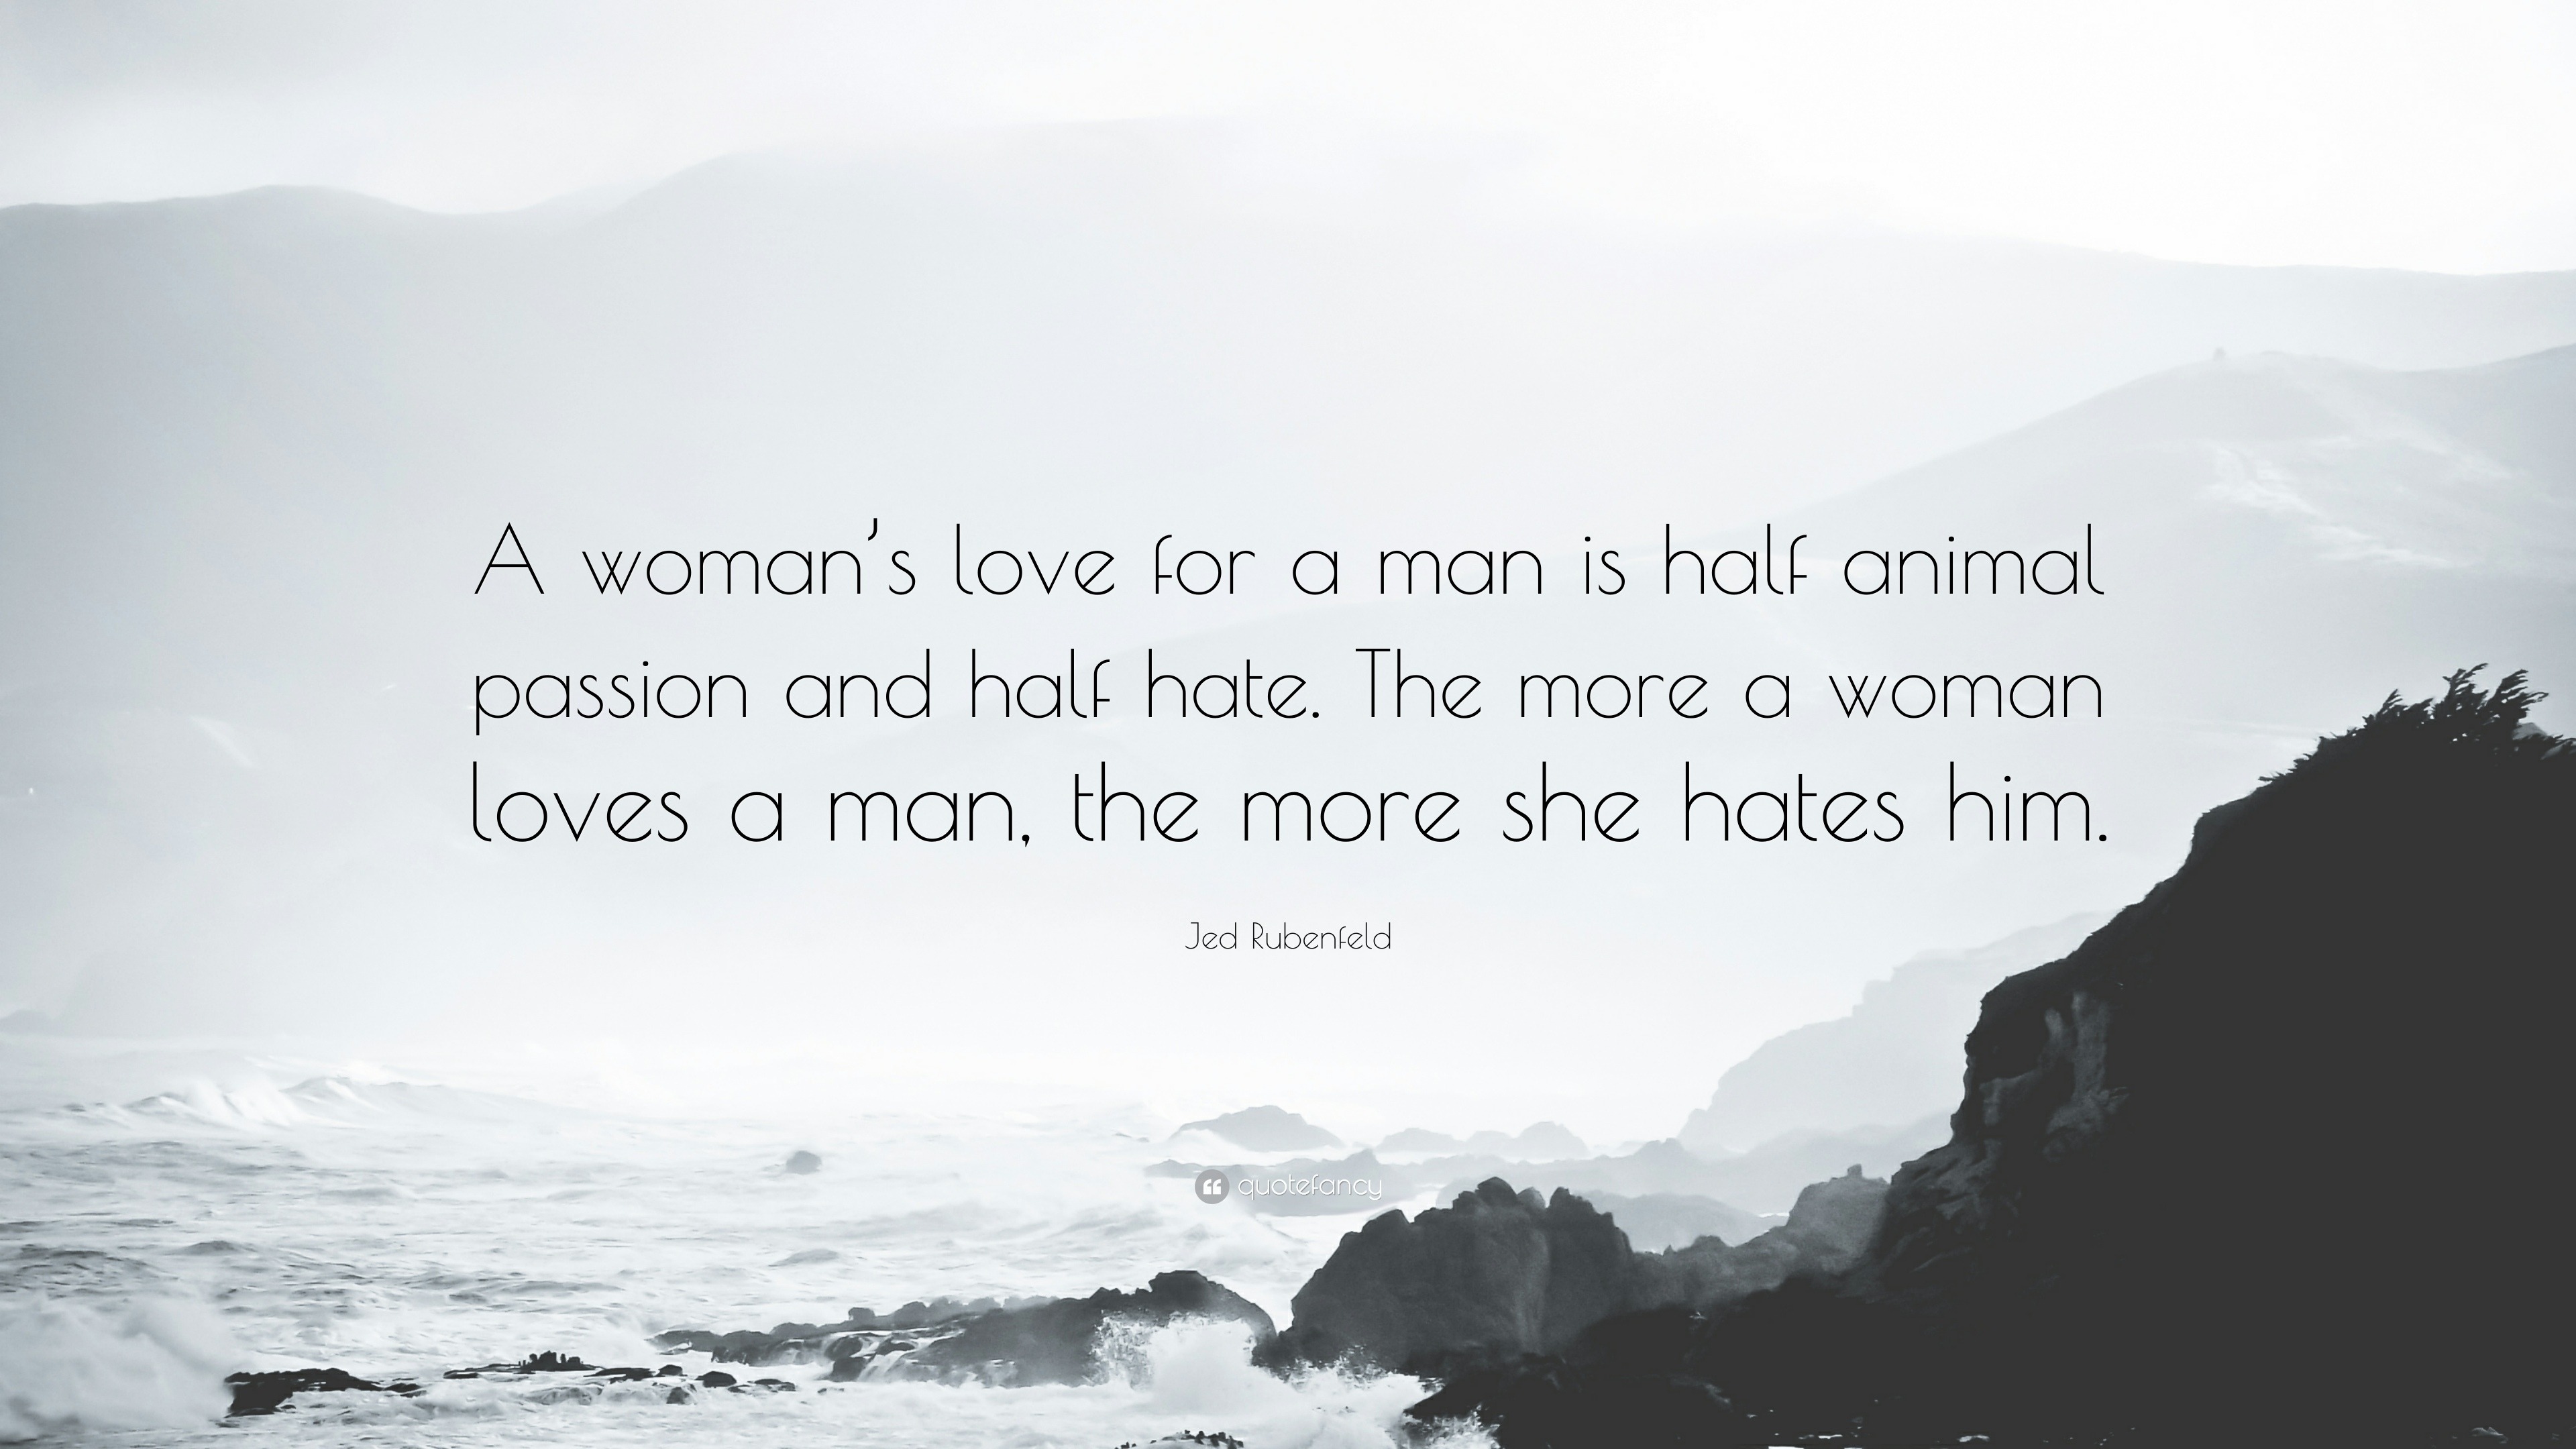 Jed Rubenfeld Quote “A woman s love for a man is half animal passion and